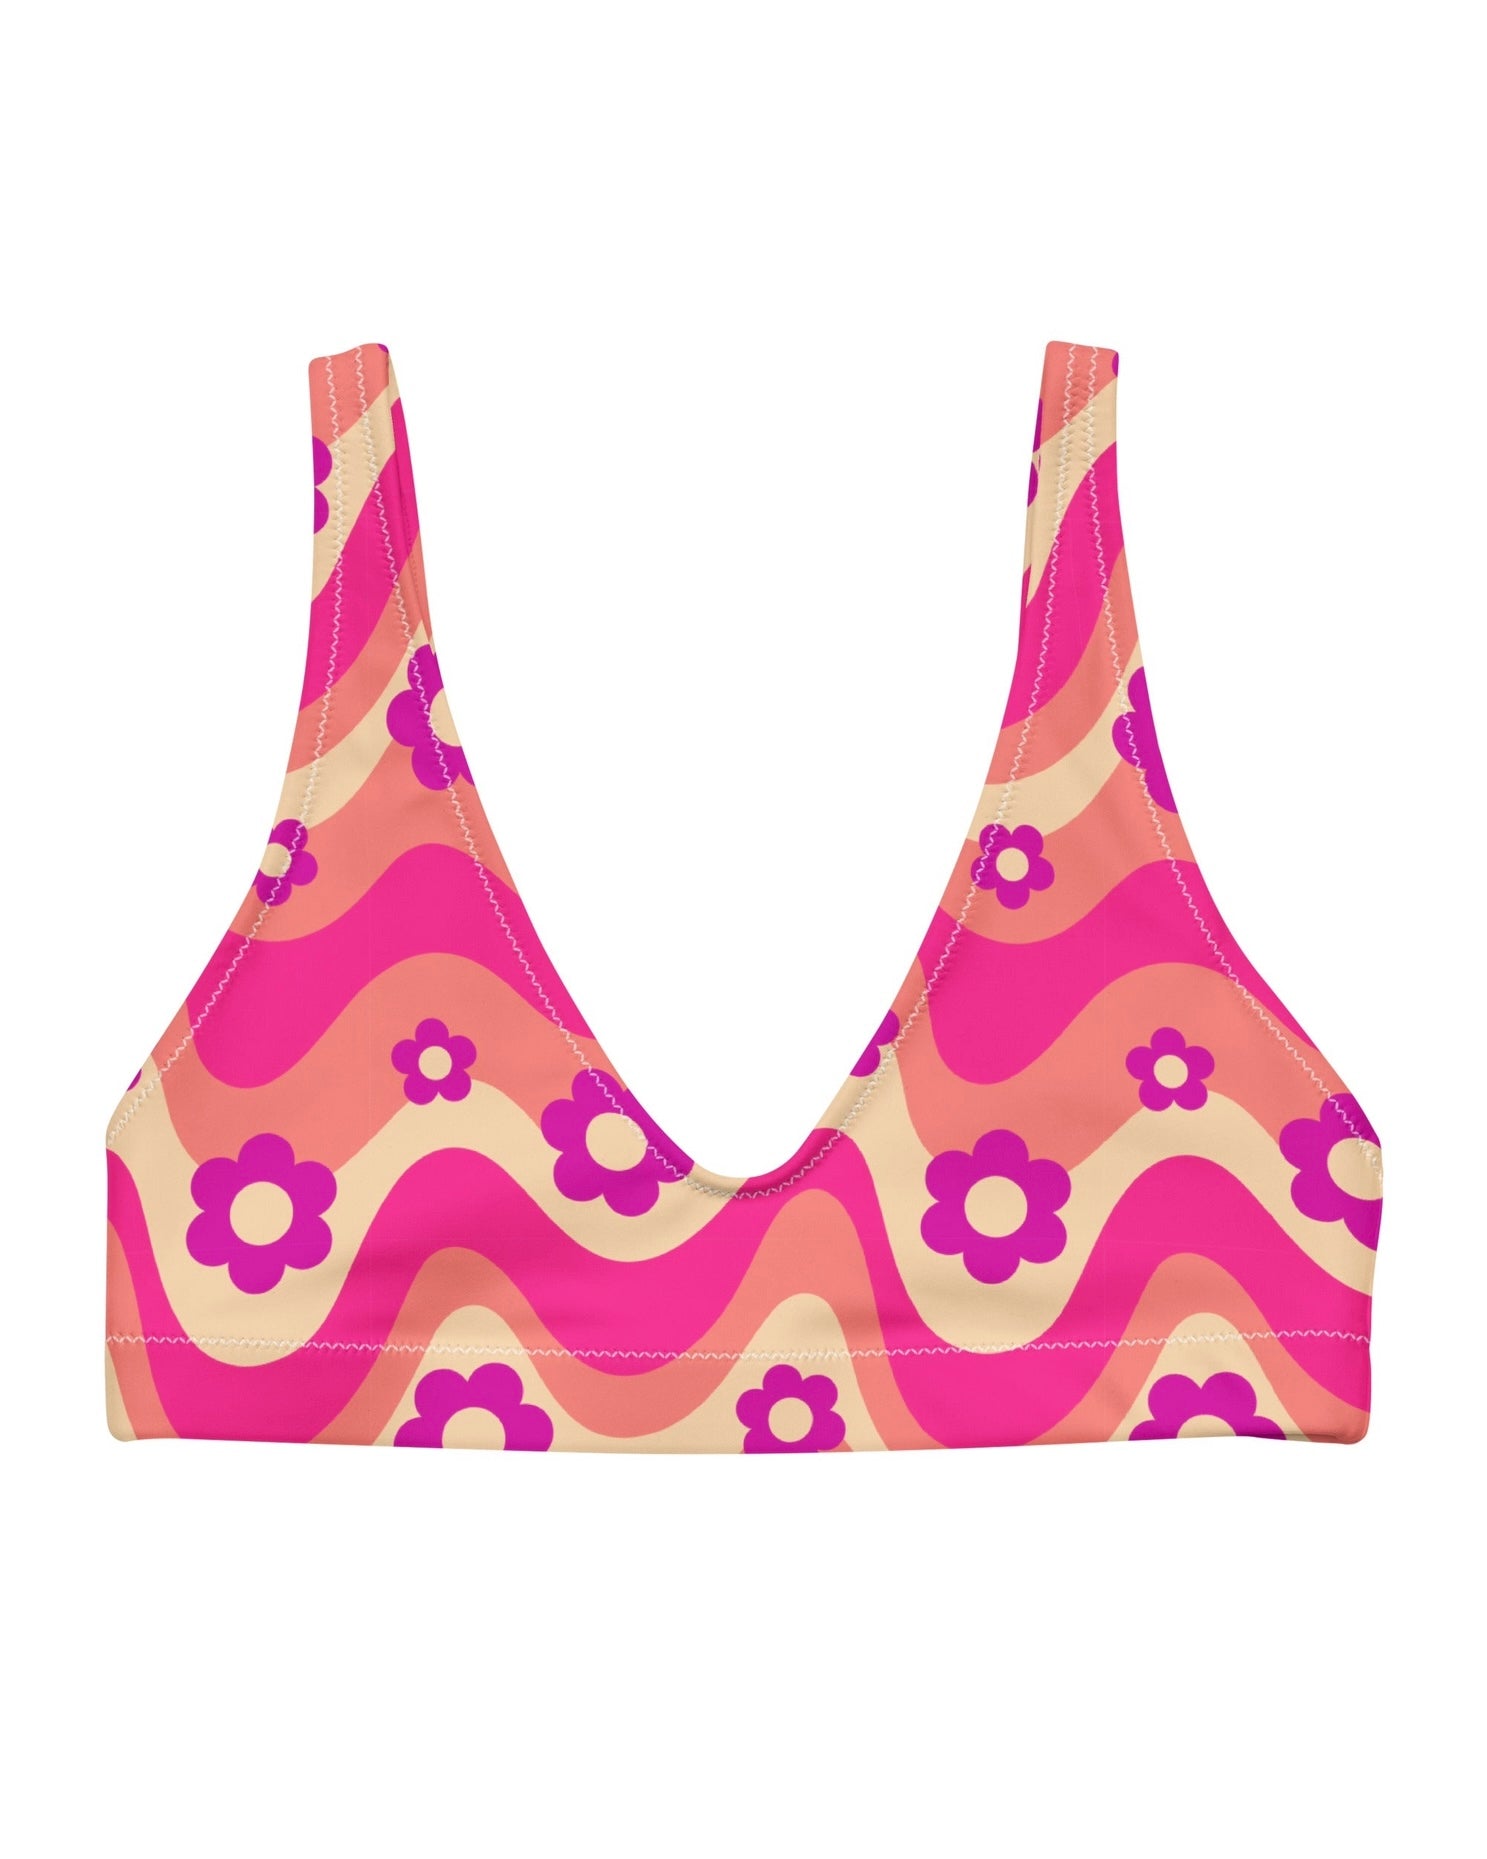 Flower Power Pink Recycled Padded V-Top, V-Top, - One Stop Rave